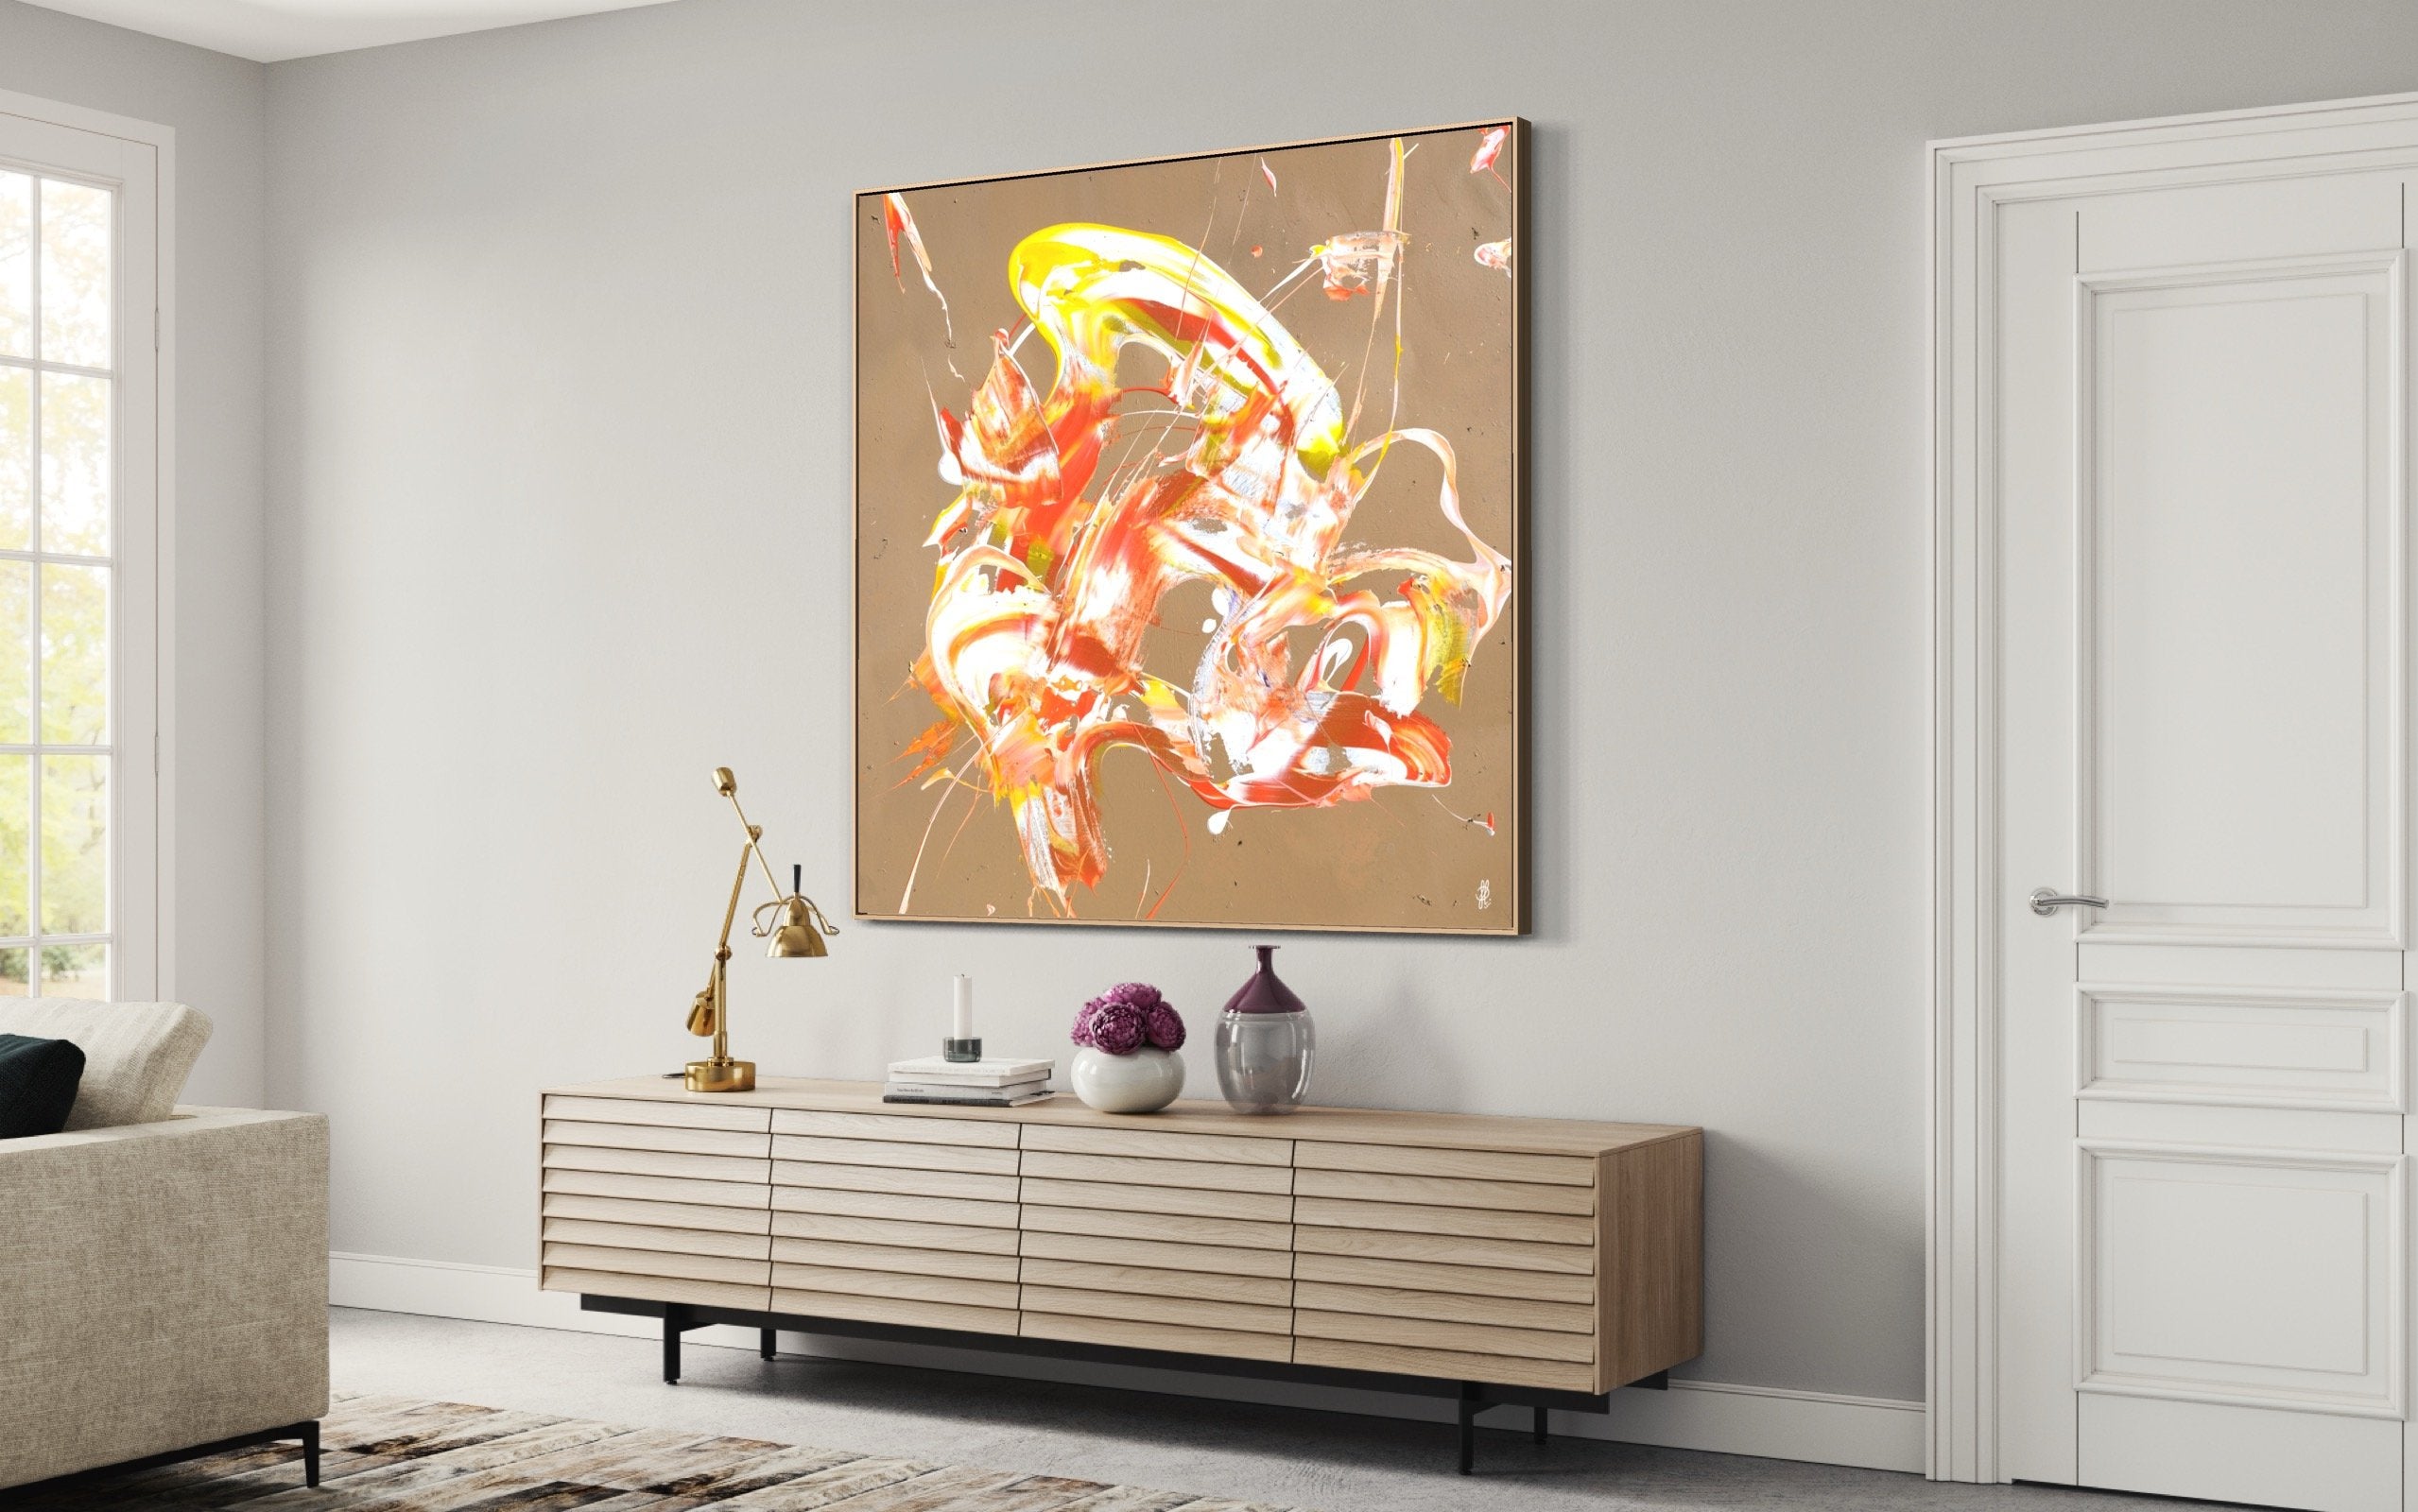 Canvas print: "Less Is More #3"